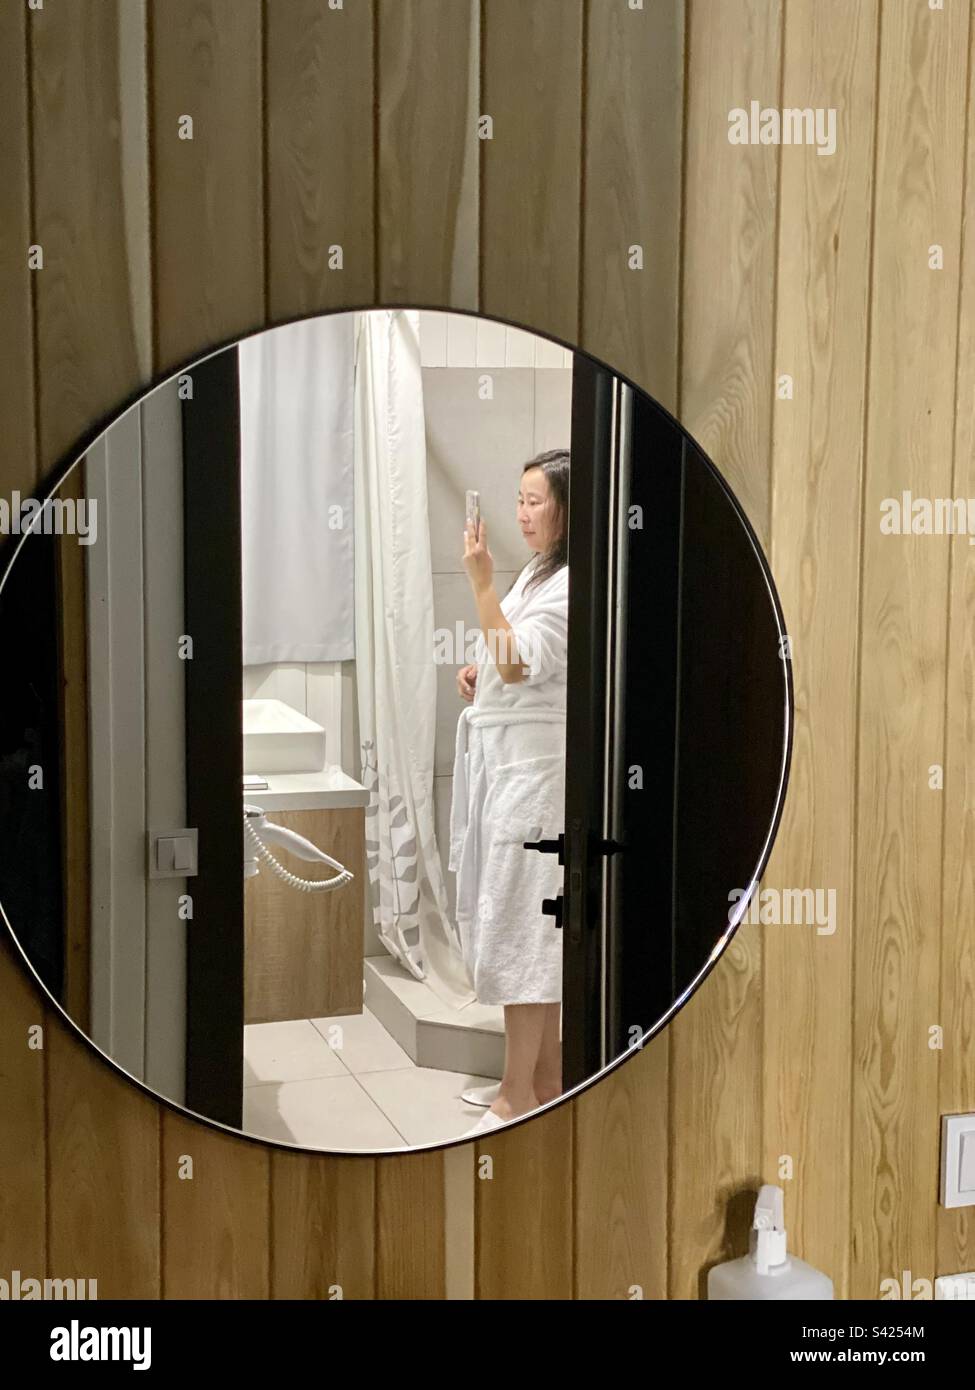 Reflection in a round mirror of a girl in a white coat in a bathtub taking a selfie. Stock Photo